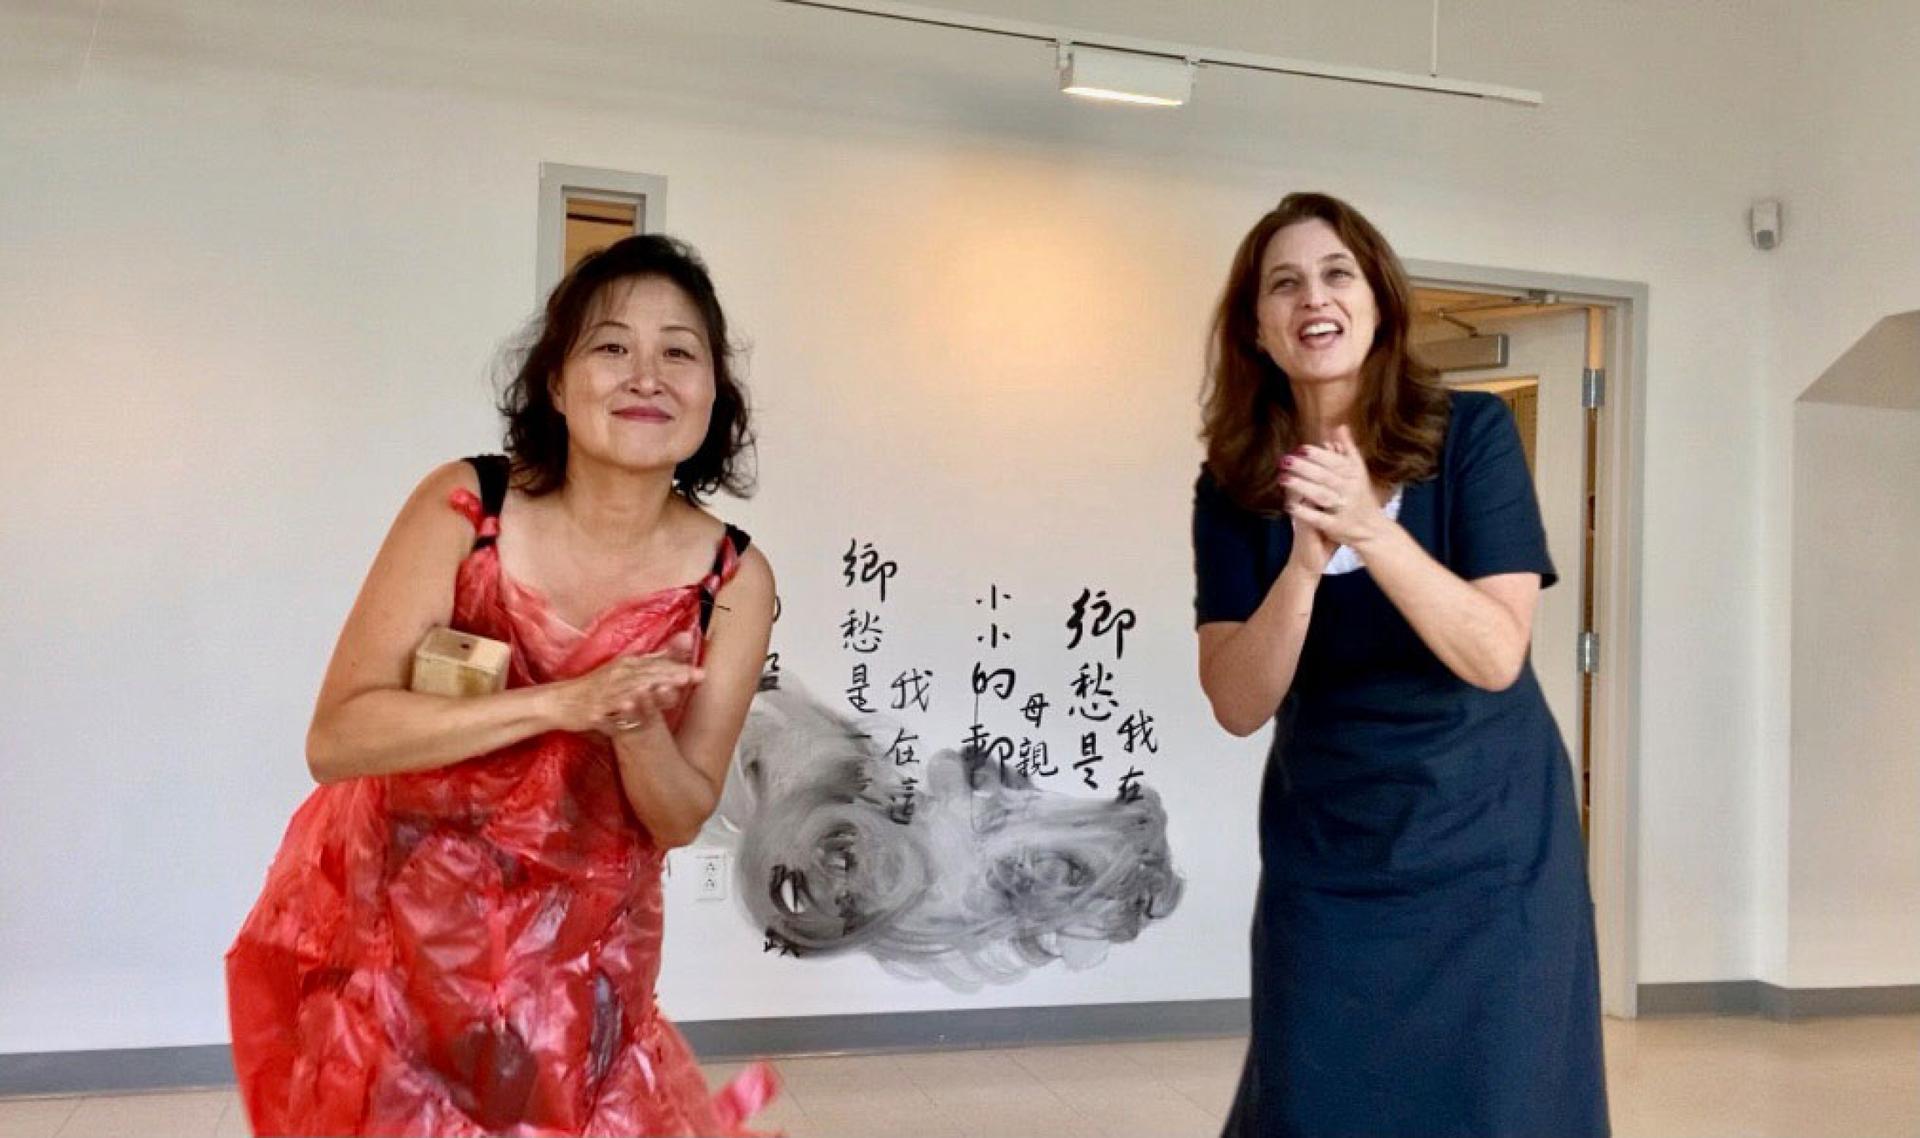 Taiwan-born artist Wen-hao (left) learns a song as part of her exhibit on immigration at Pao Arts Center, in Boston, Massachusetts.